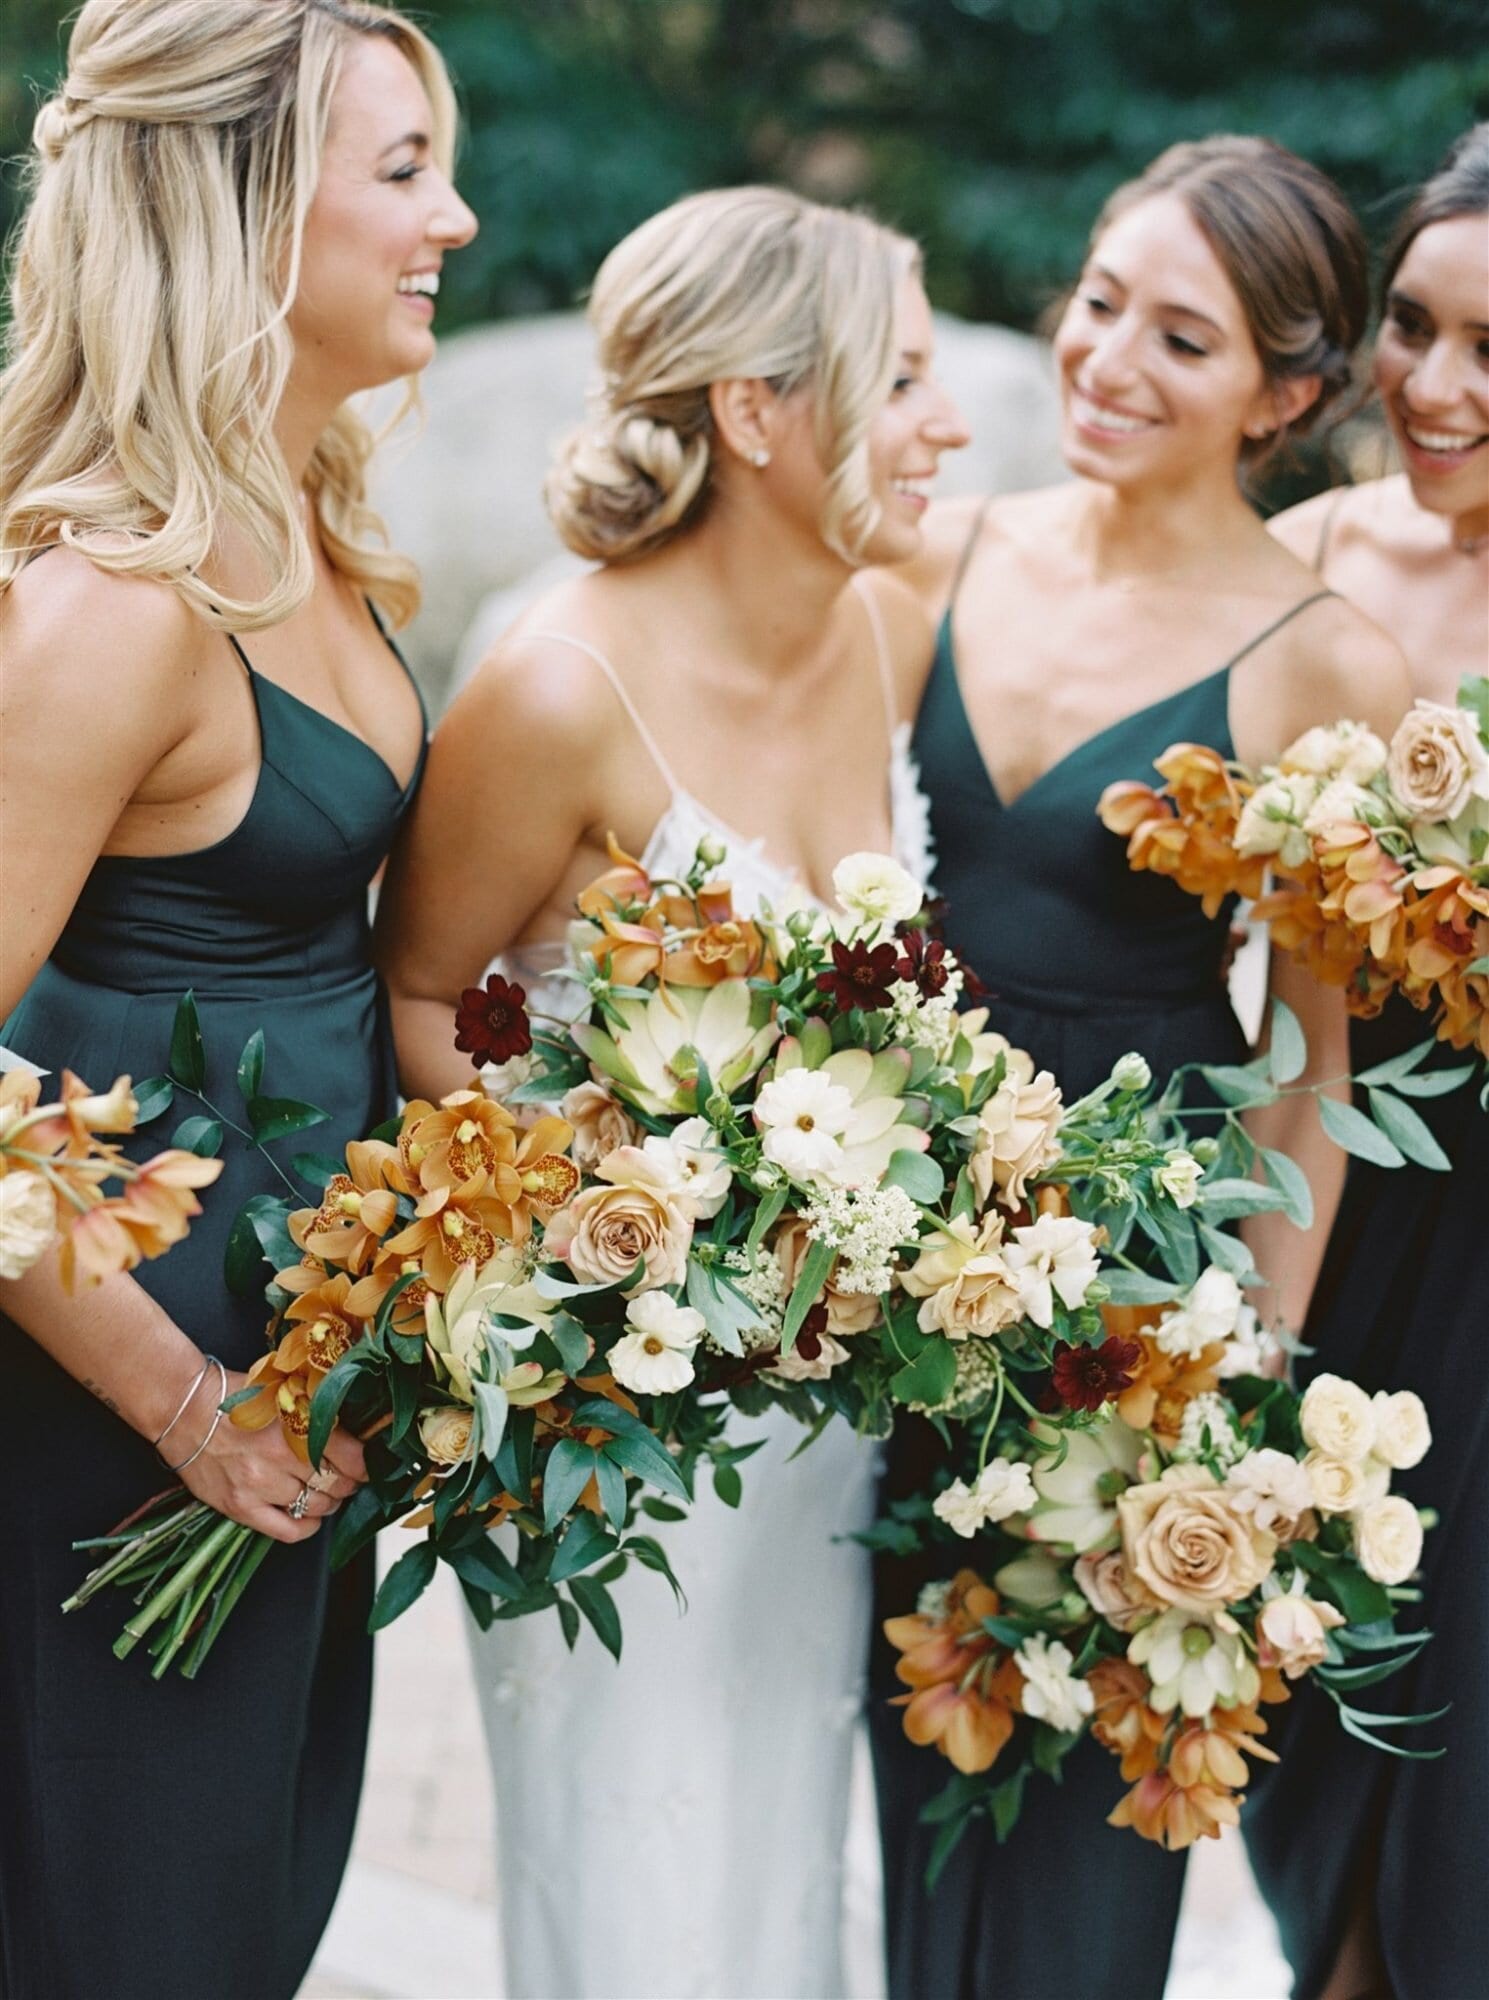 The Best Foliage to Use in Your Wedding Bouquet for Every Season